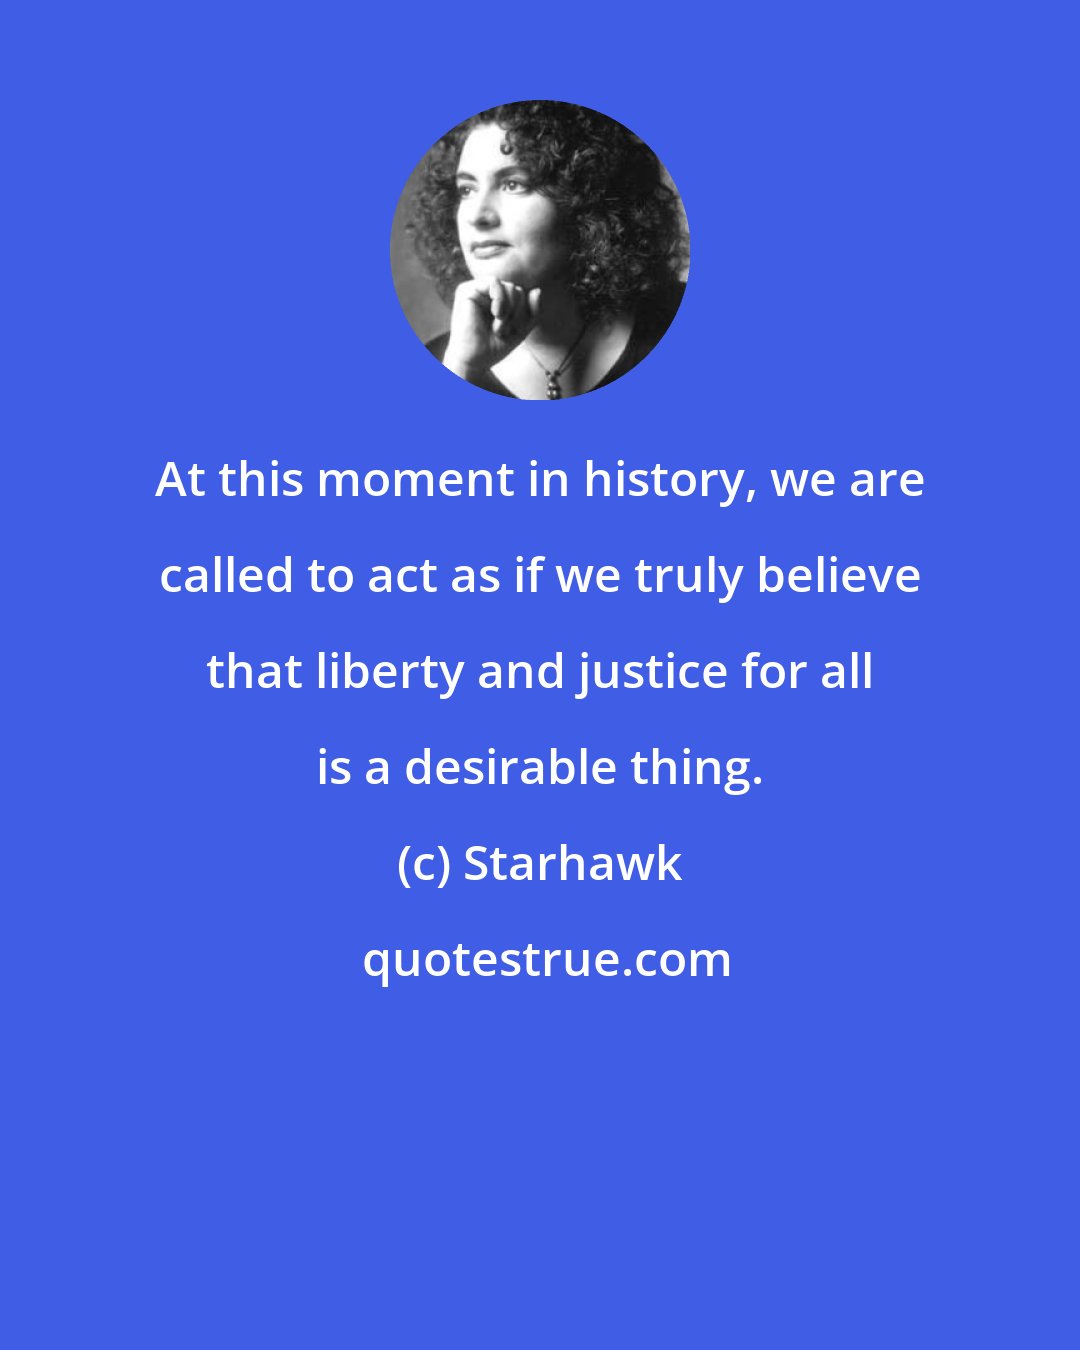 Starhawk: At this moment in history, we are called to act as if we truly believe that liberty and justice for all is a desirable thing.